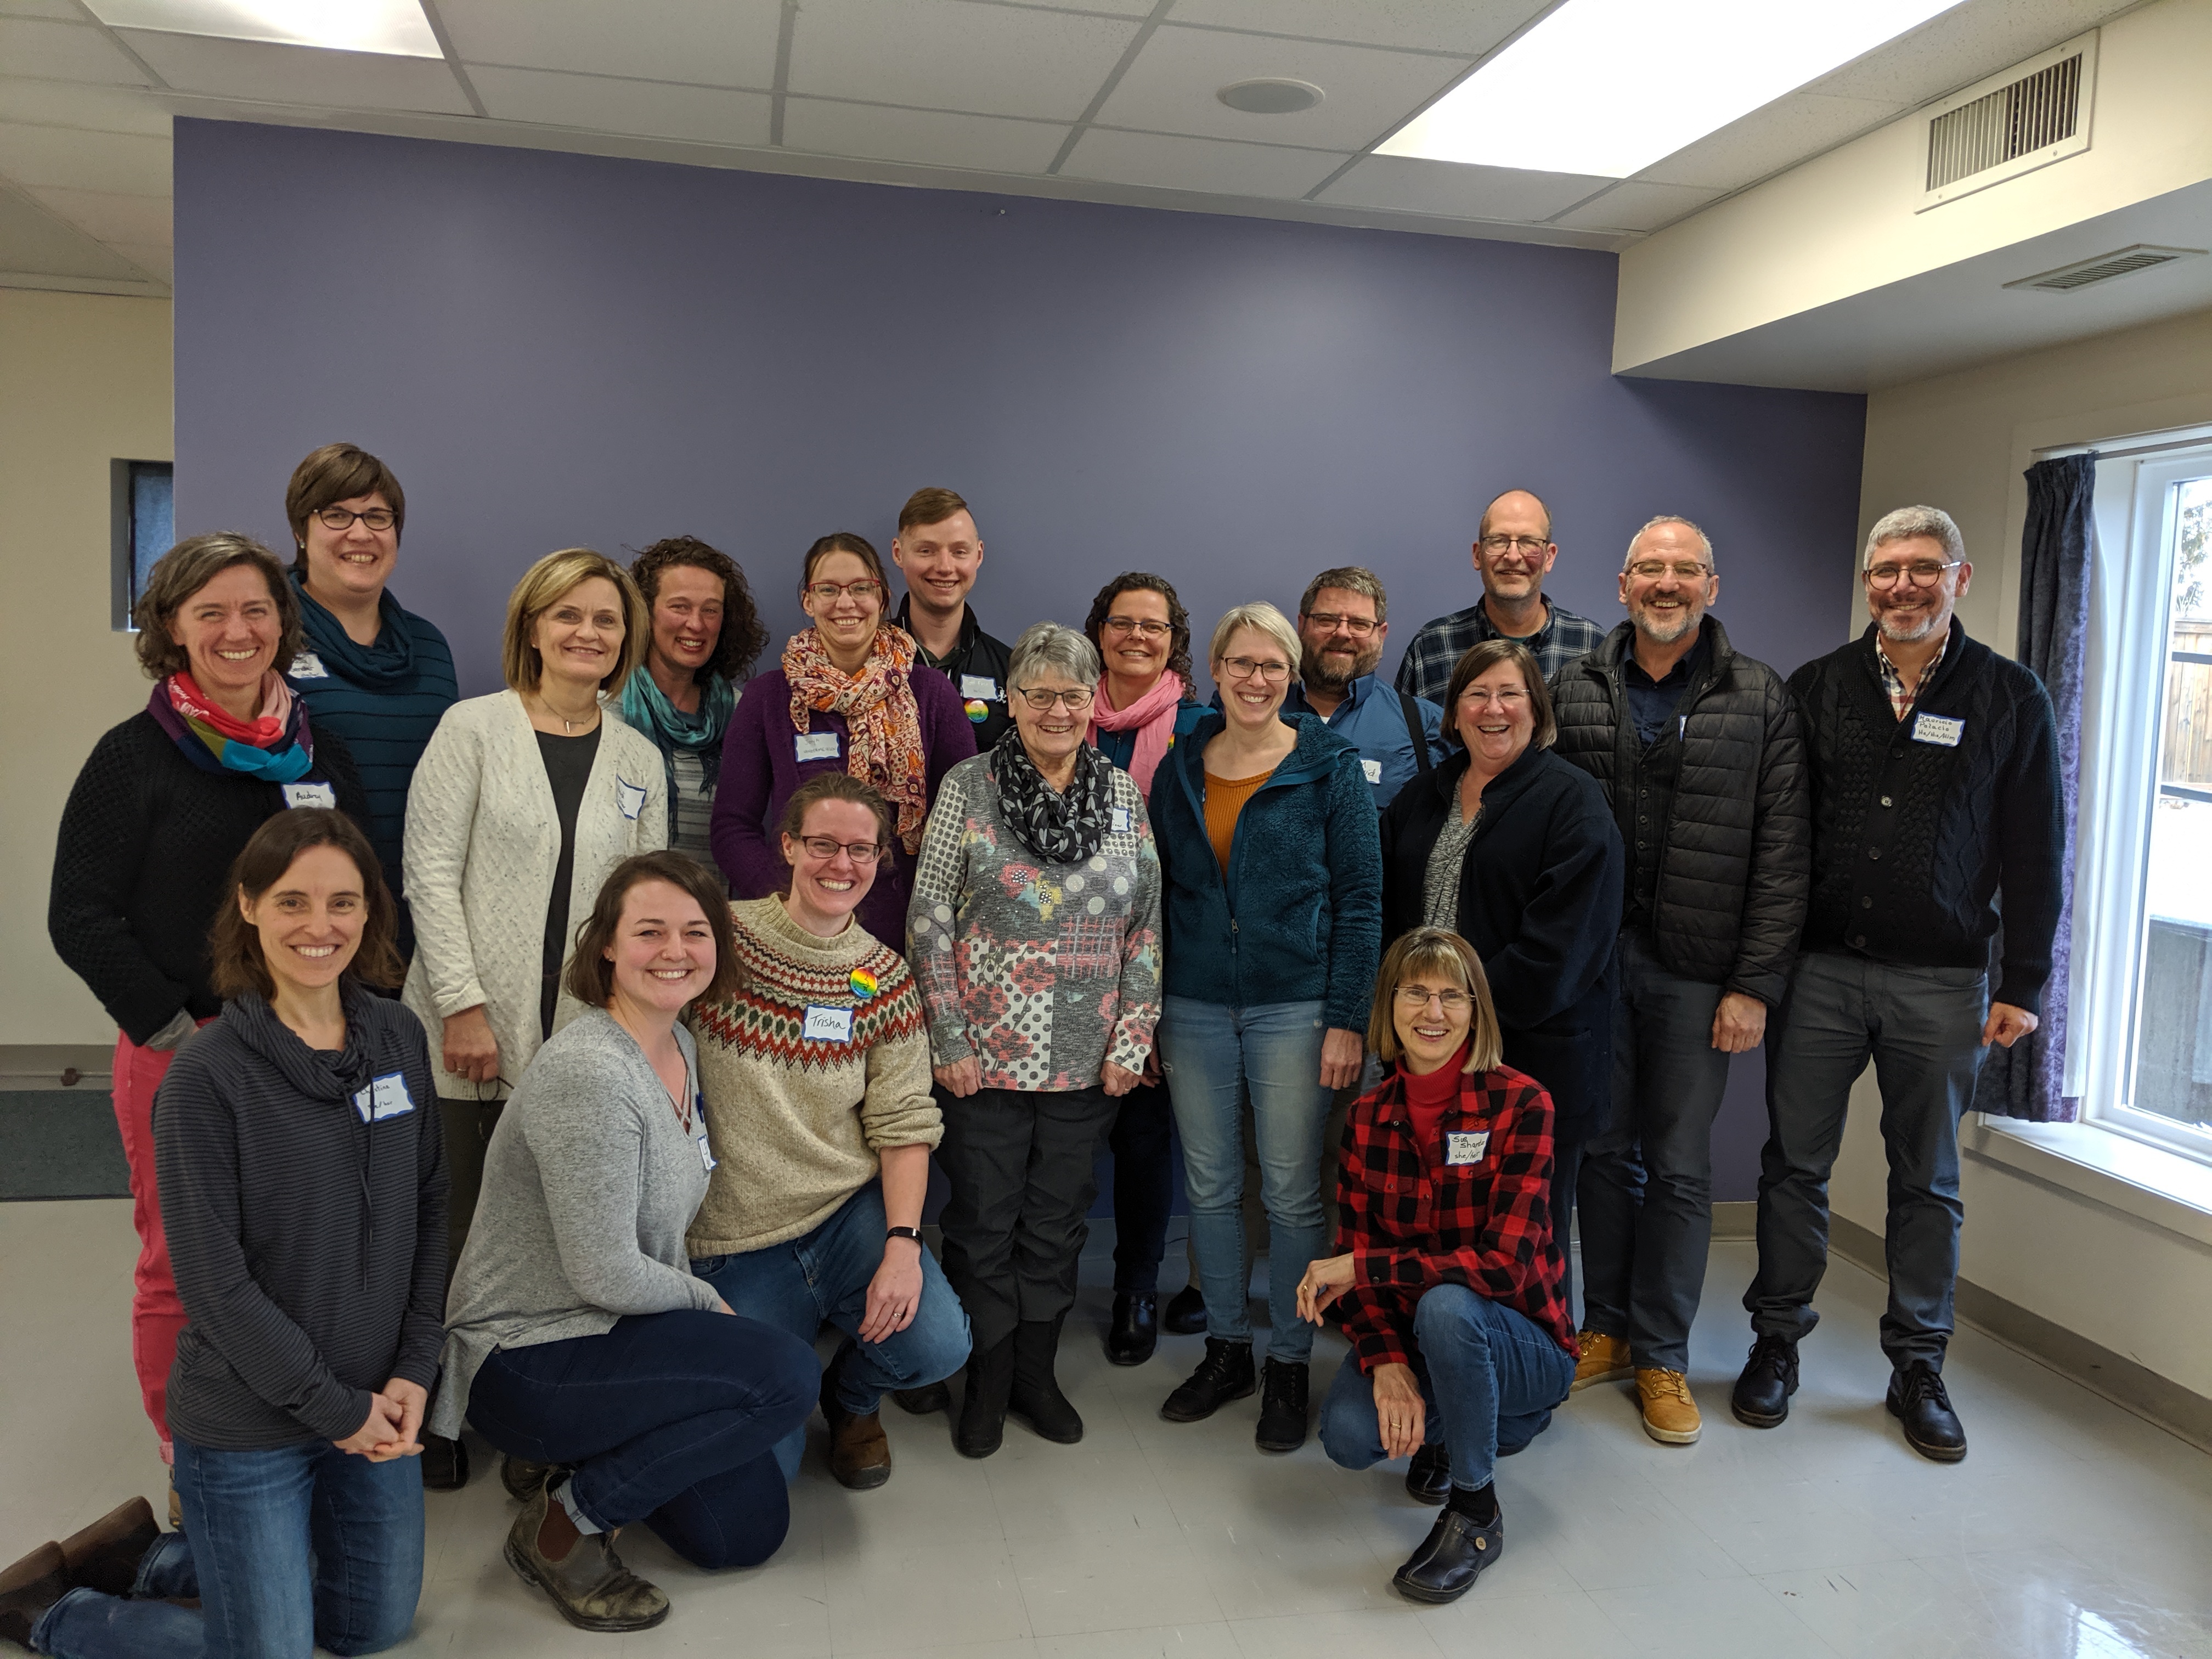 The group who gathered in Ontario in February 2020 to dream about what ITT could become